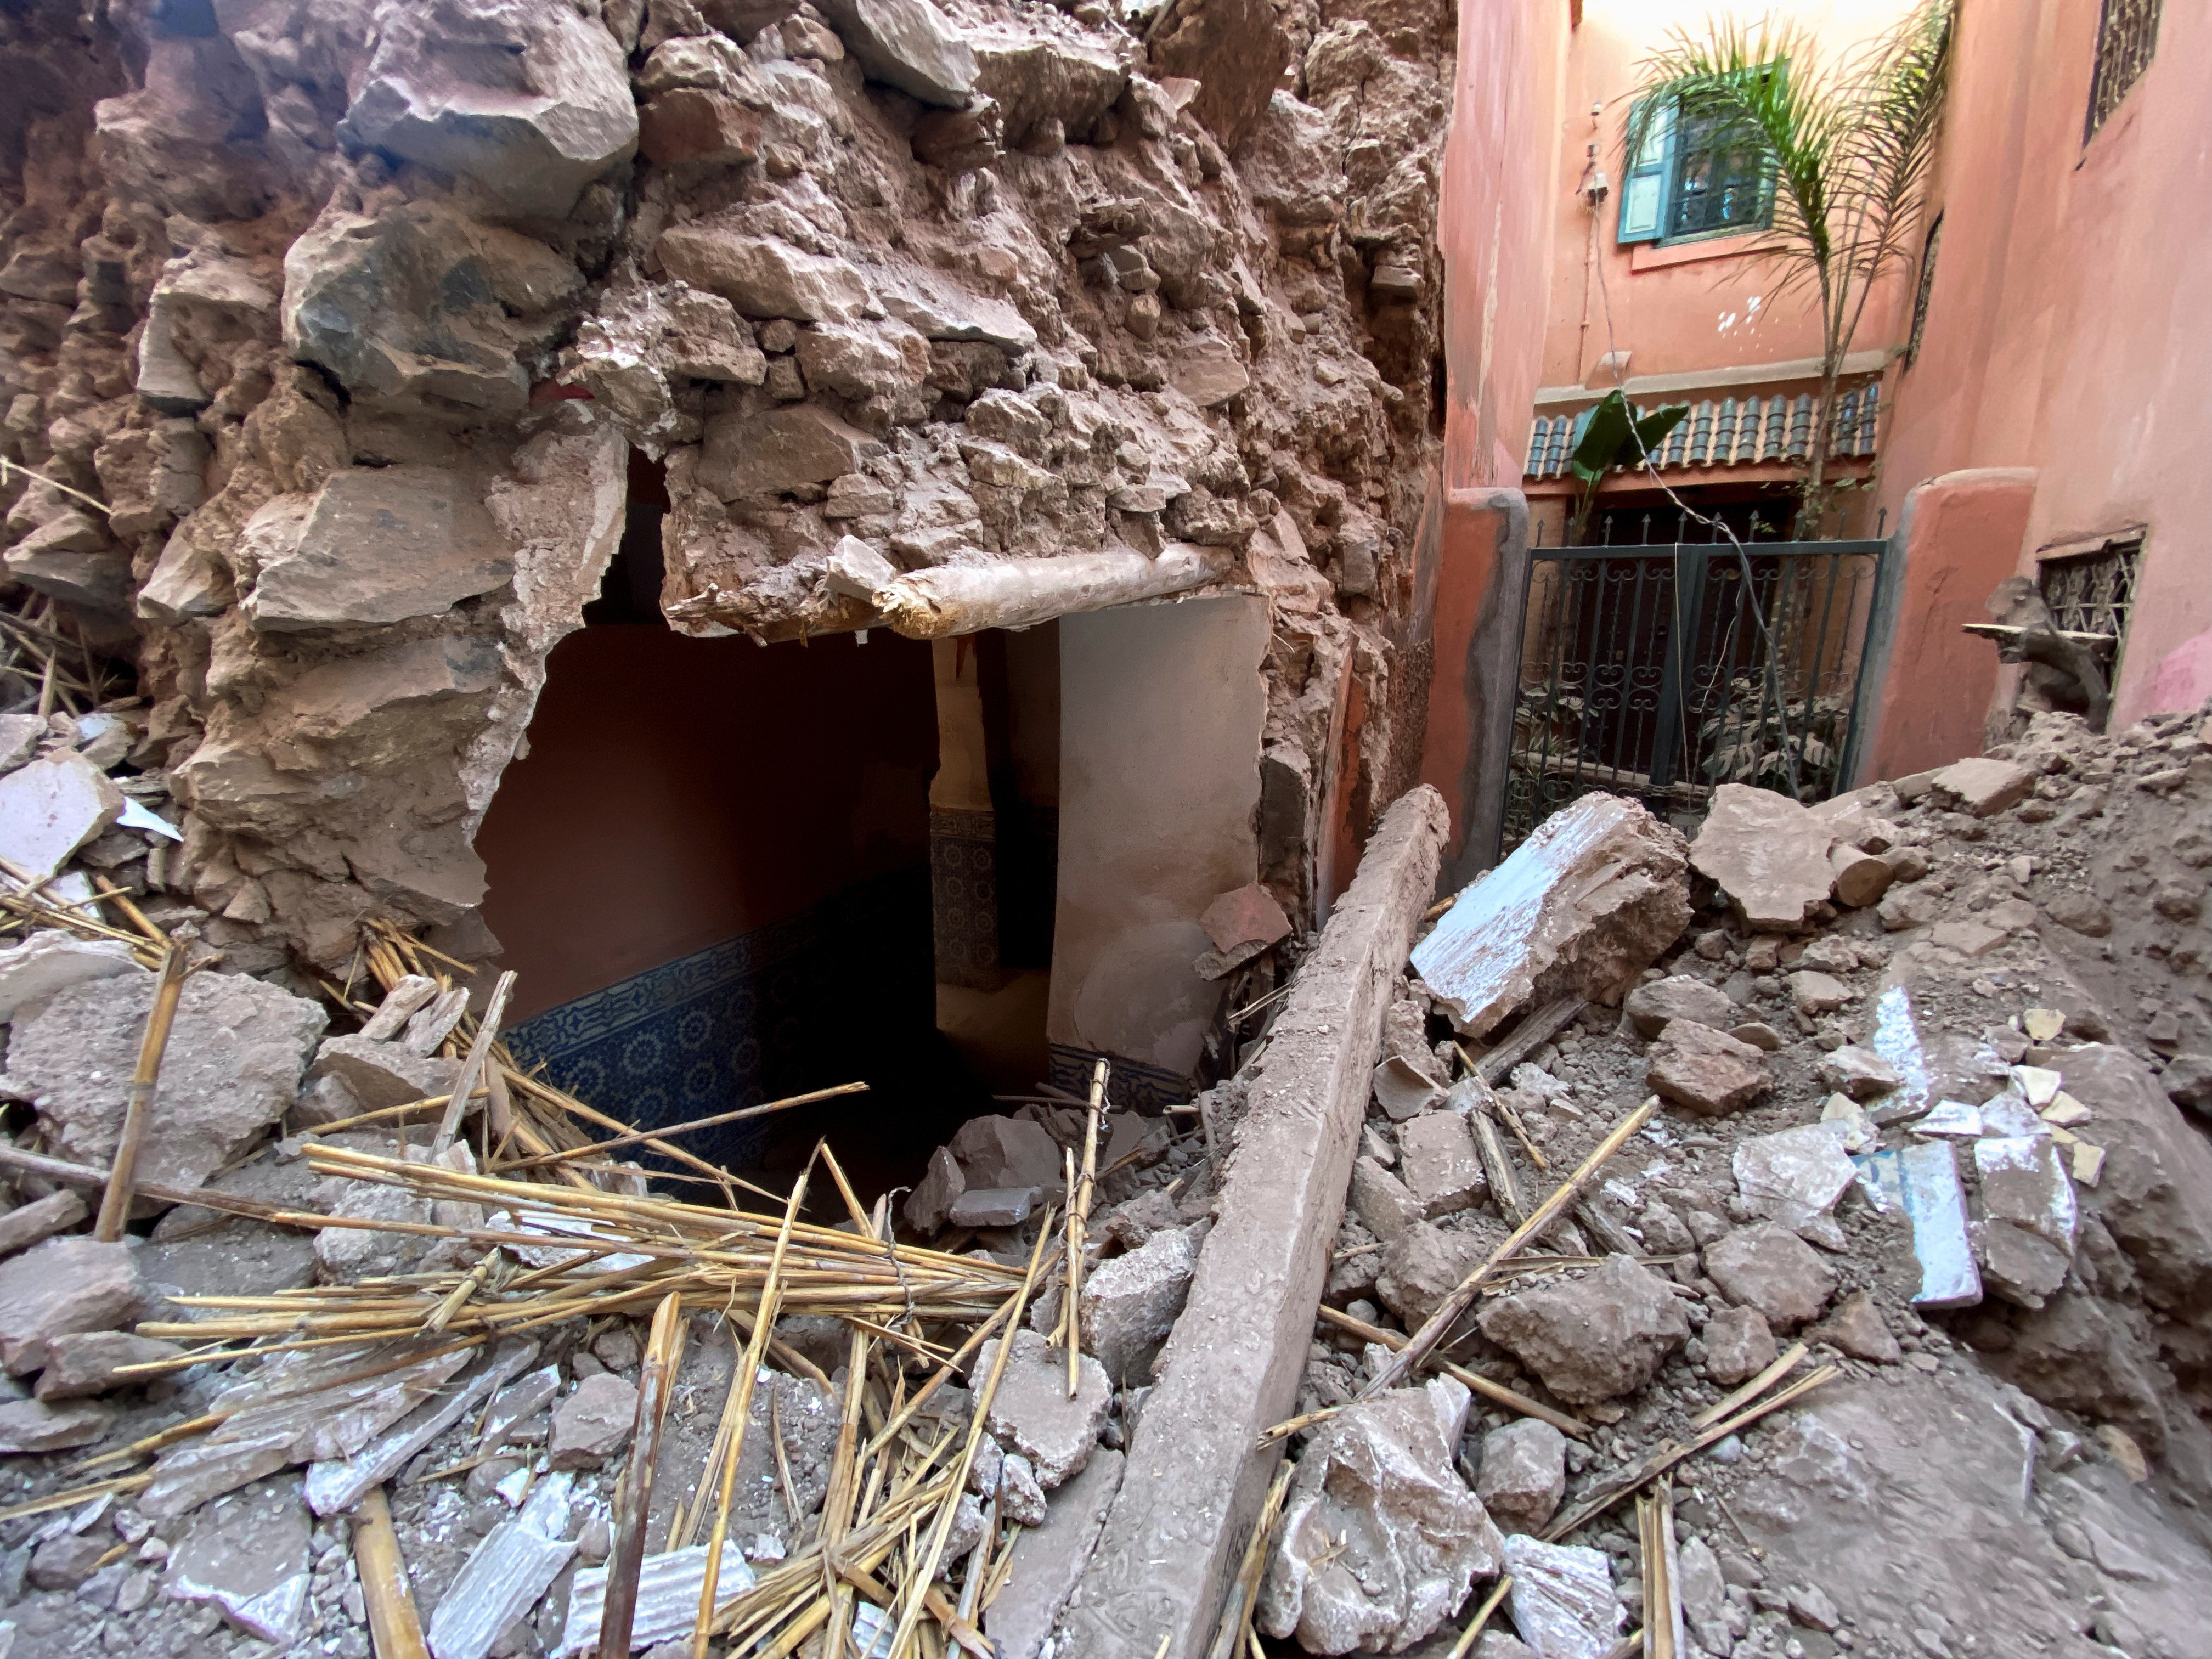 Damage in the historic city of Marrakech, following a powerful earthquake